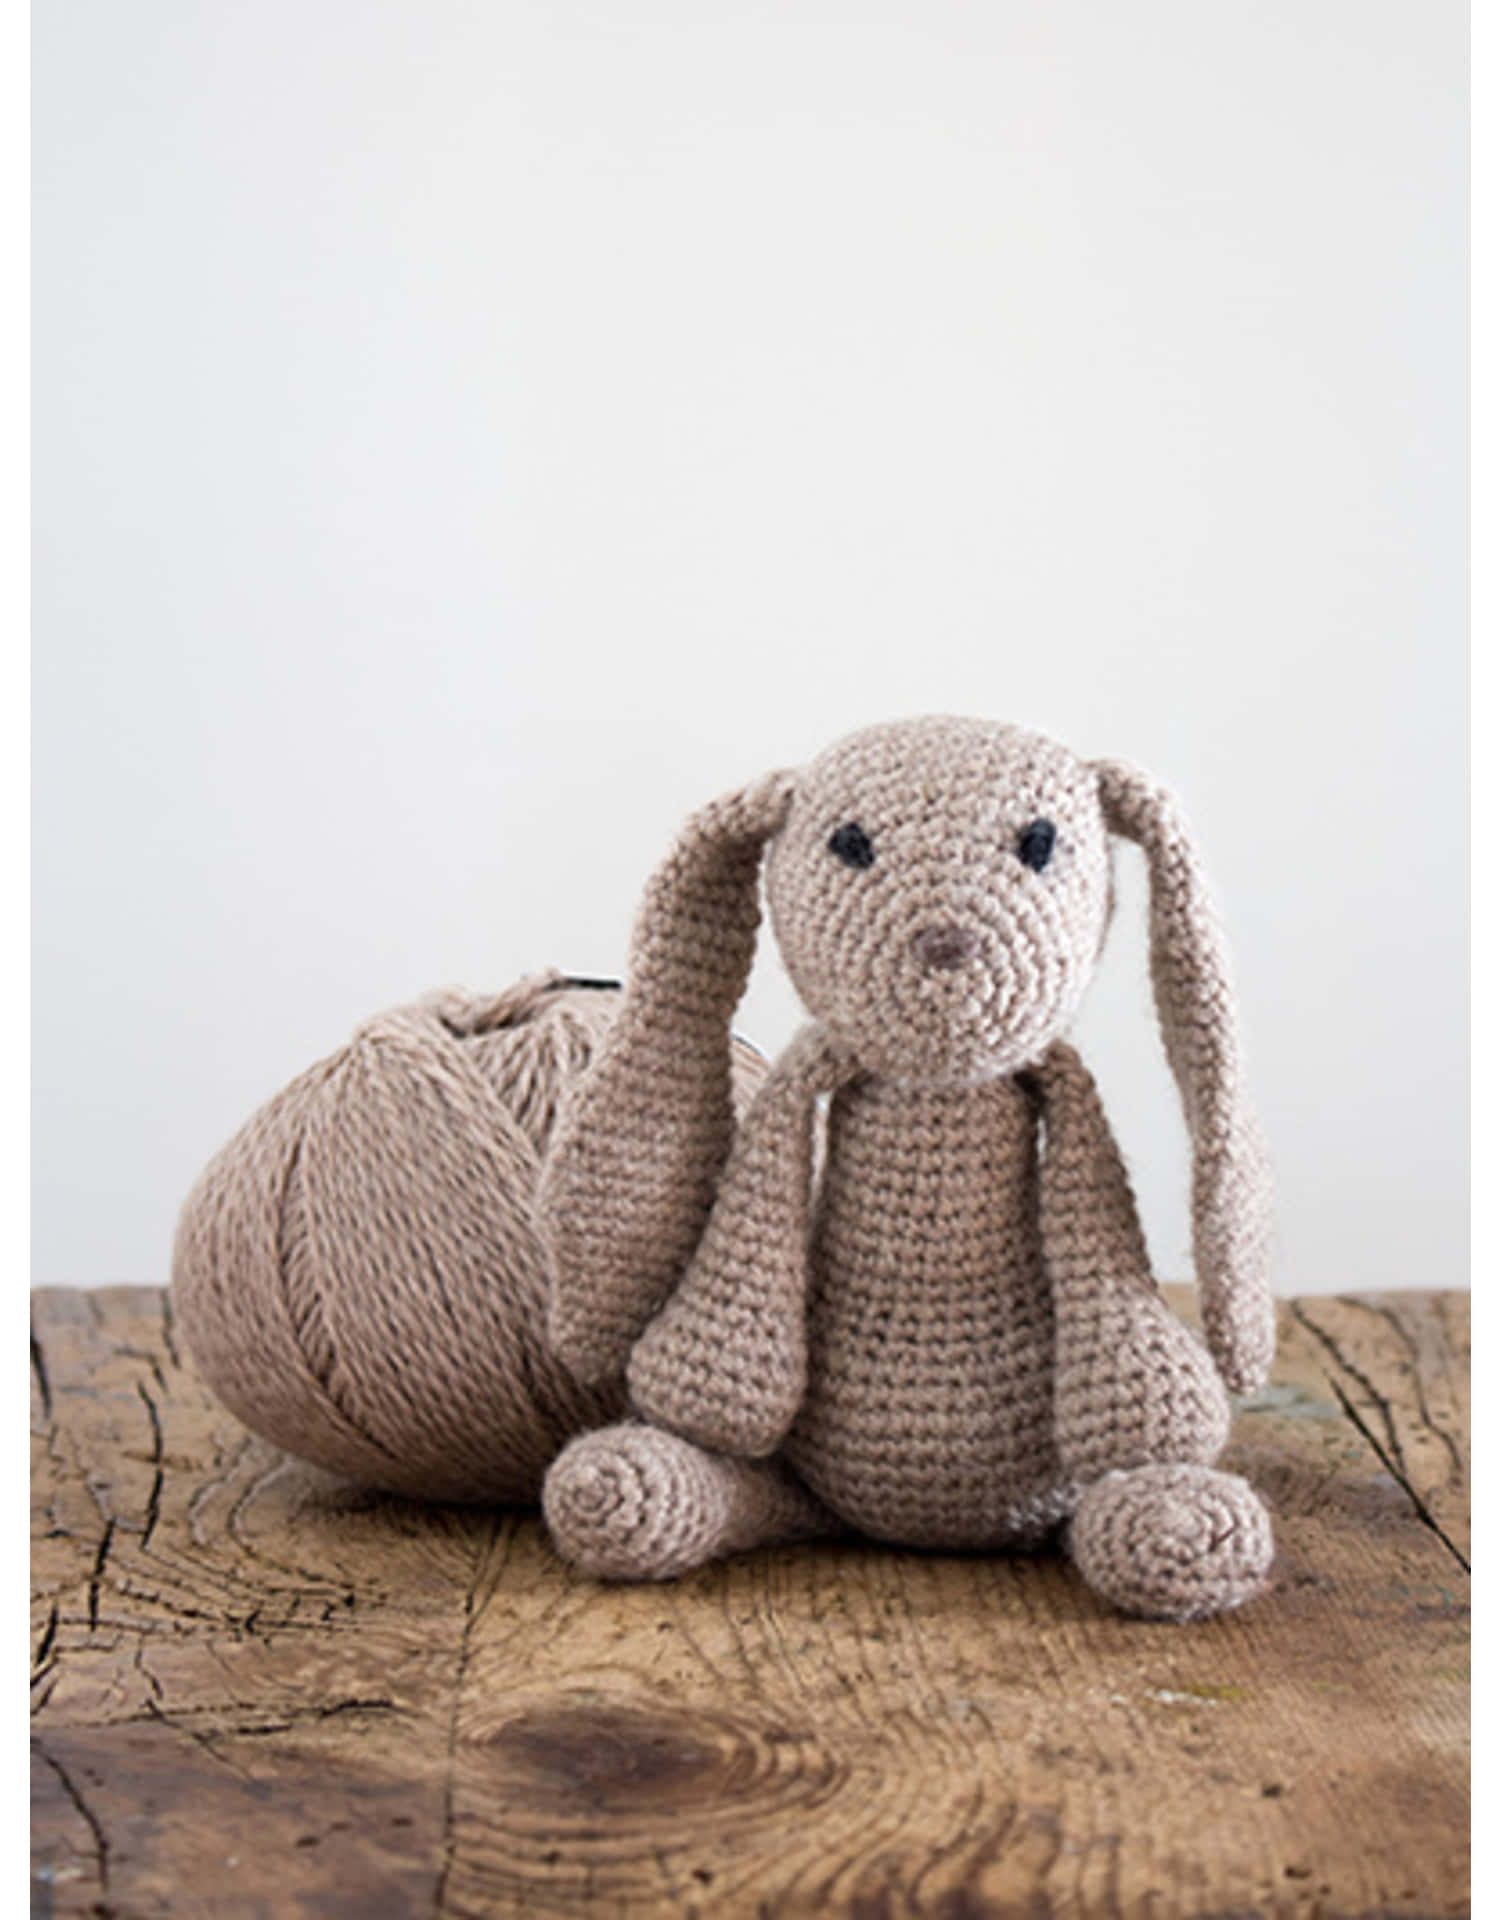 Stuffed Toy Crochet Picture